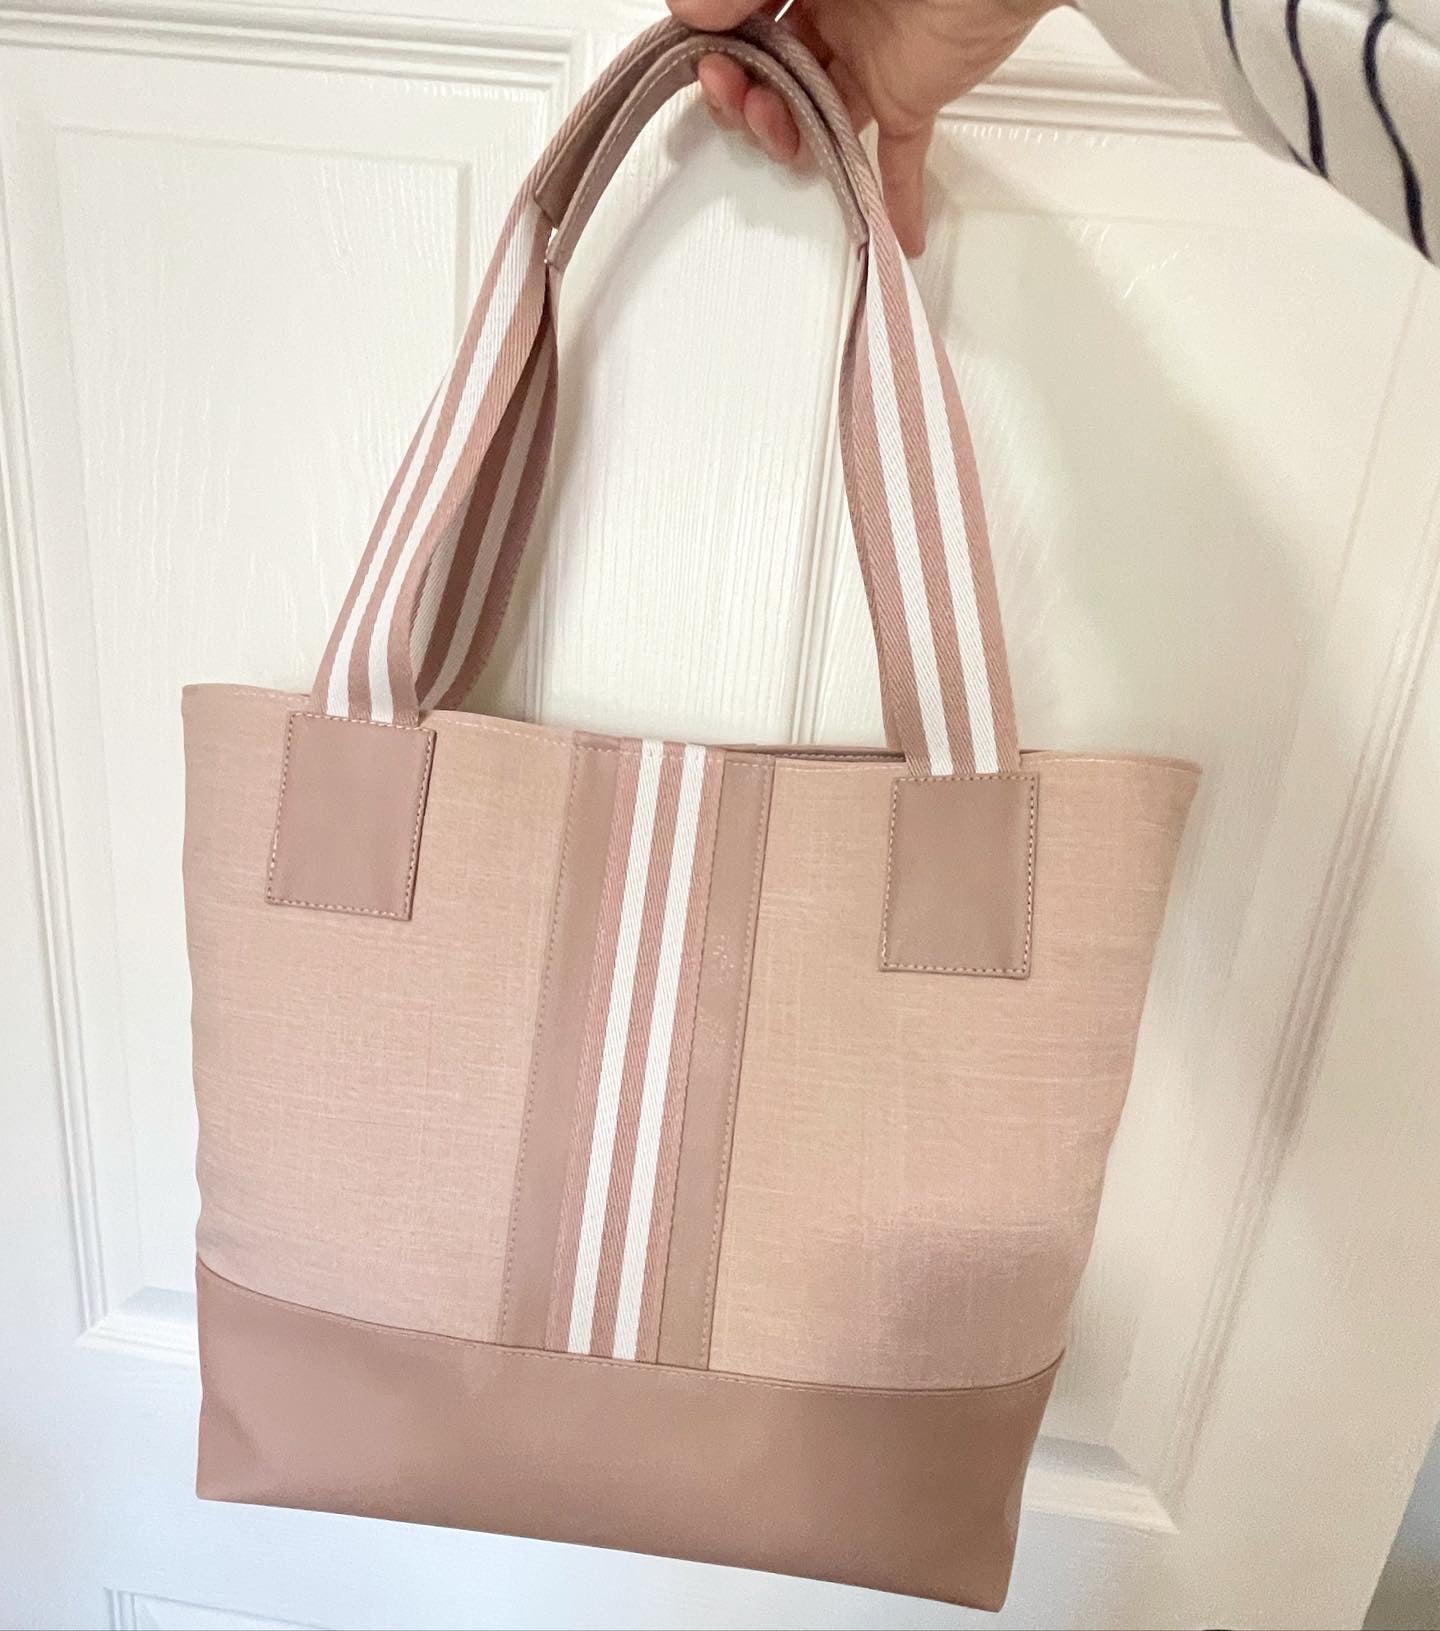 Light Brown Woven Pattern Tote